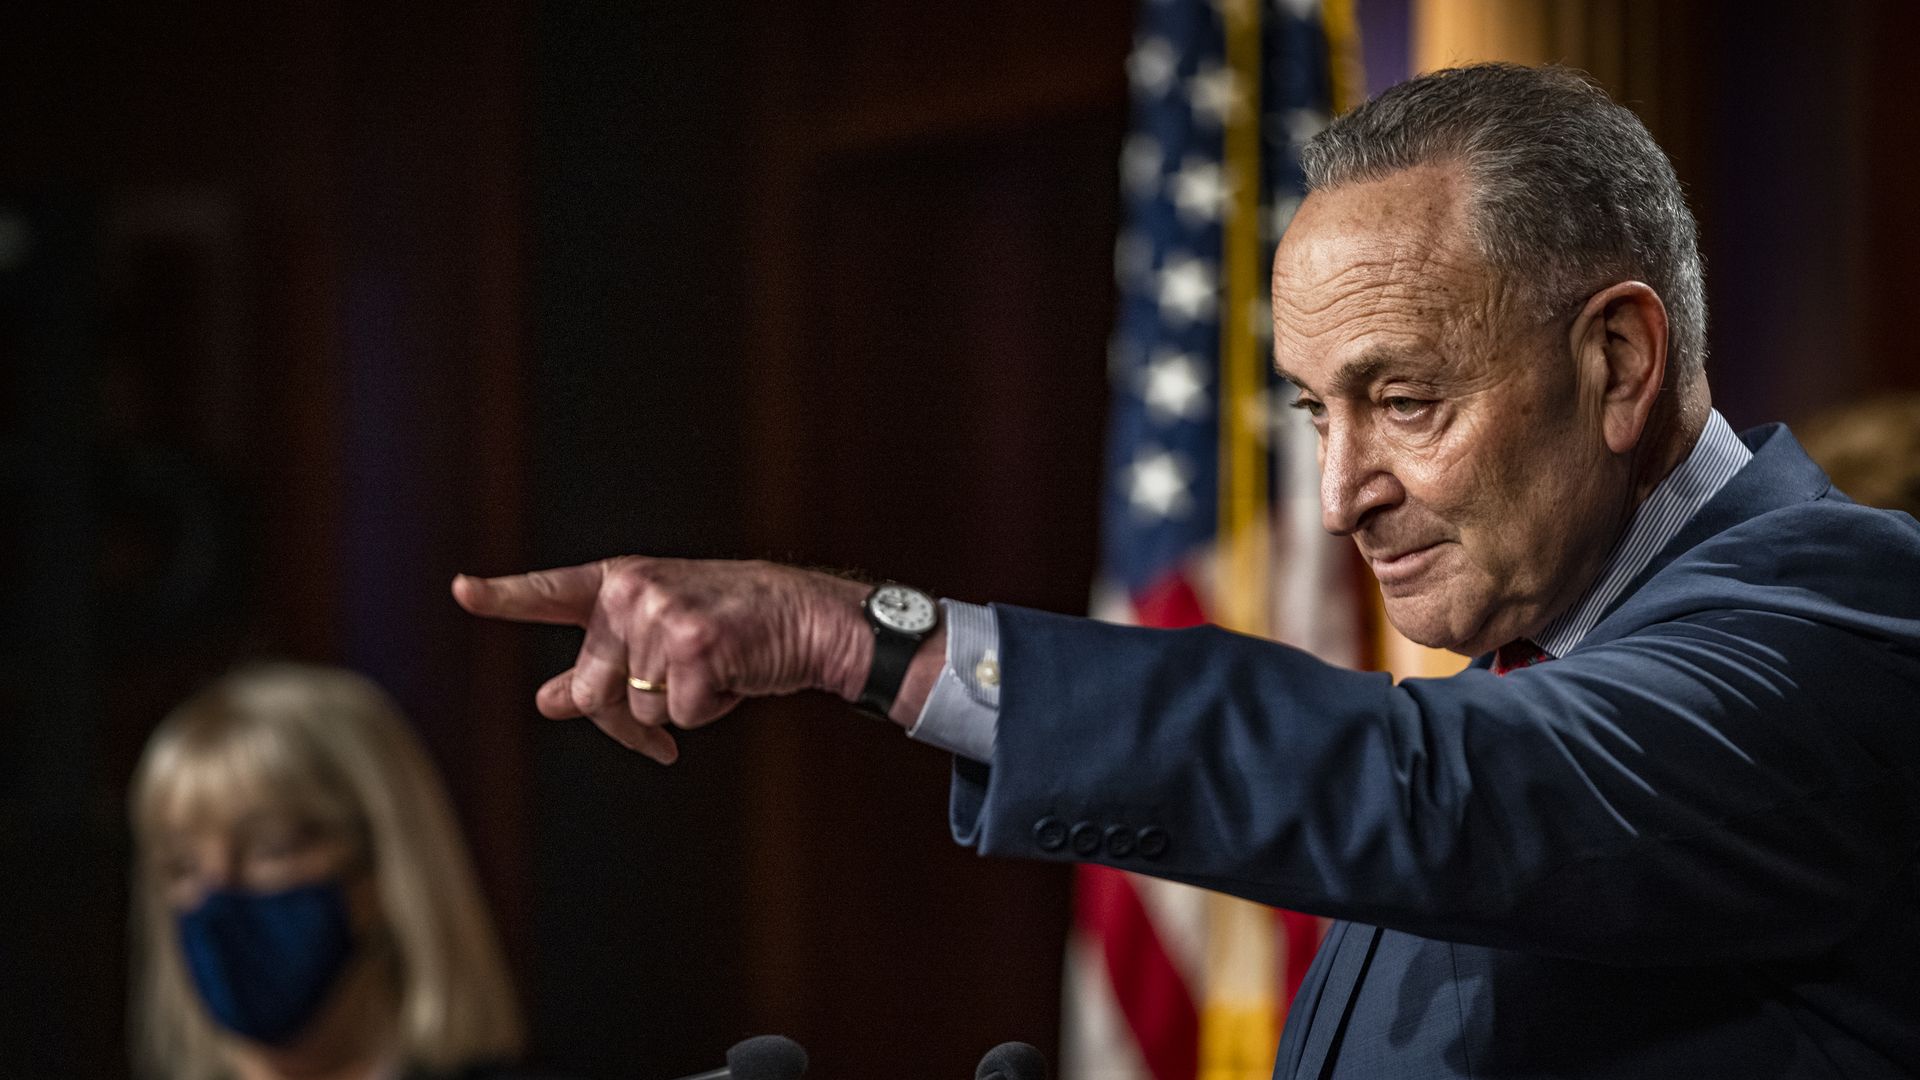 Senate Majority Leader Chuck Schumer takes a question during a press conference at the U.S. Capitol in Washington, D.C.